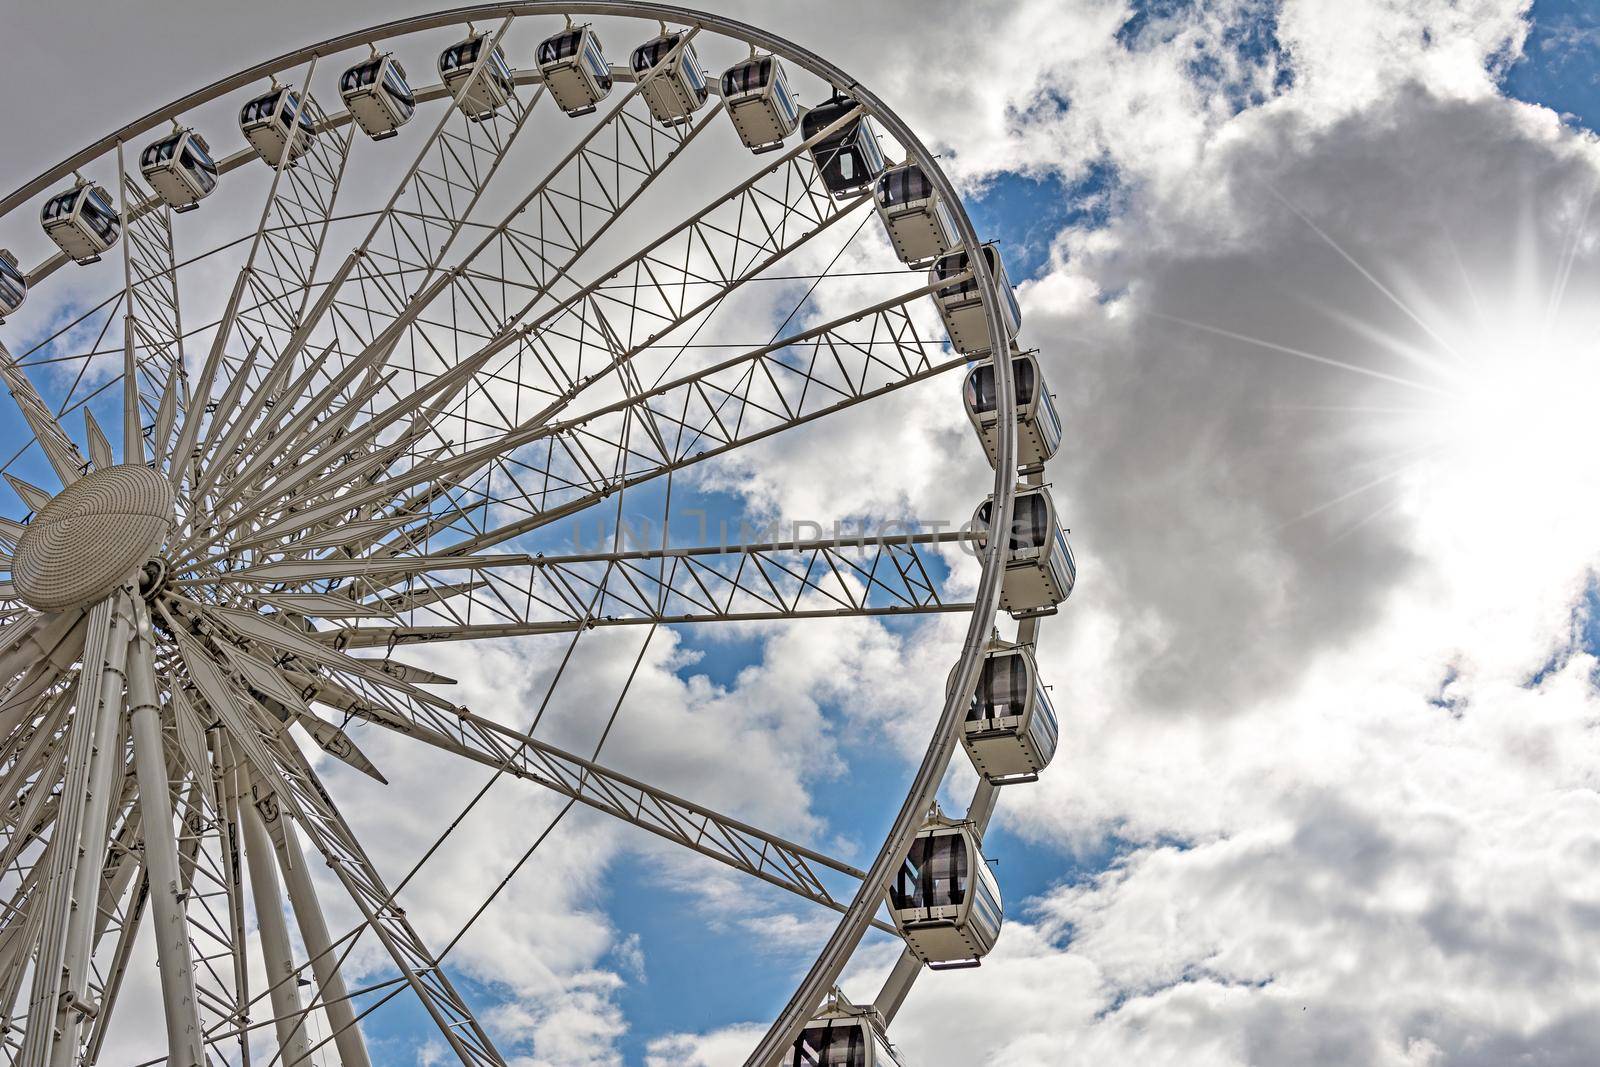 Part of a big ferris wheel on a cloudy sky background.